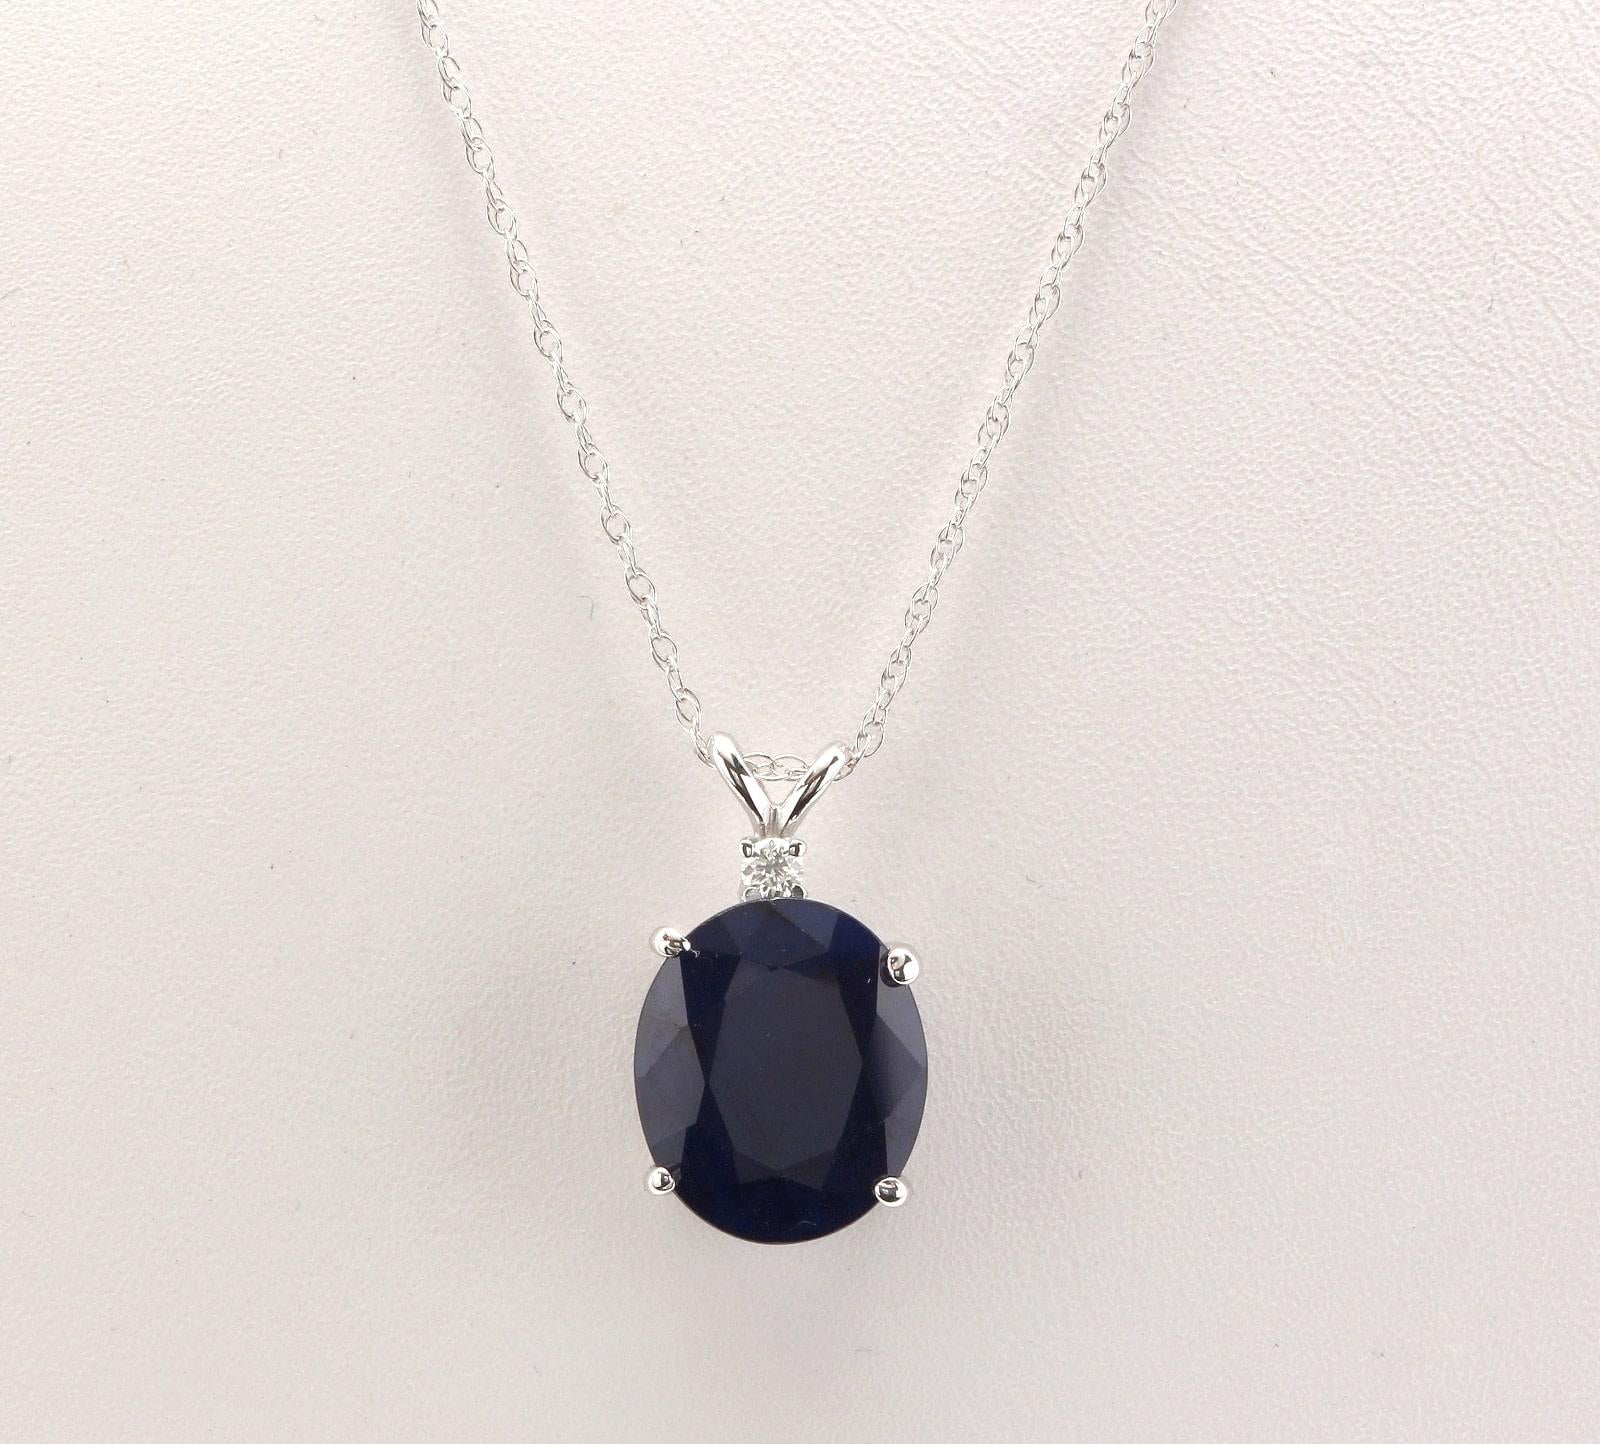 8.55Ct Natural Sapphire and Diamond 14K Solid White Gold Necklace

Amazing looking piece!

Stamped: 14K

Natural Oval Cut Sapphire Weights: Approx. 8.50 Carats

Sapphire Measures: Approx. 13 x 11mm

Total Natural Round Diamond weights: 0.05 Carats